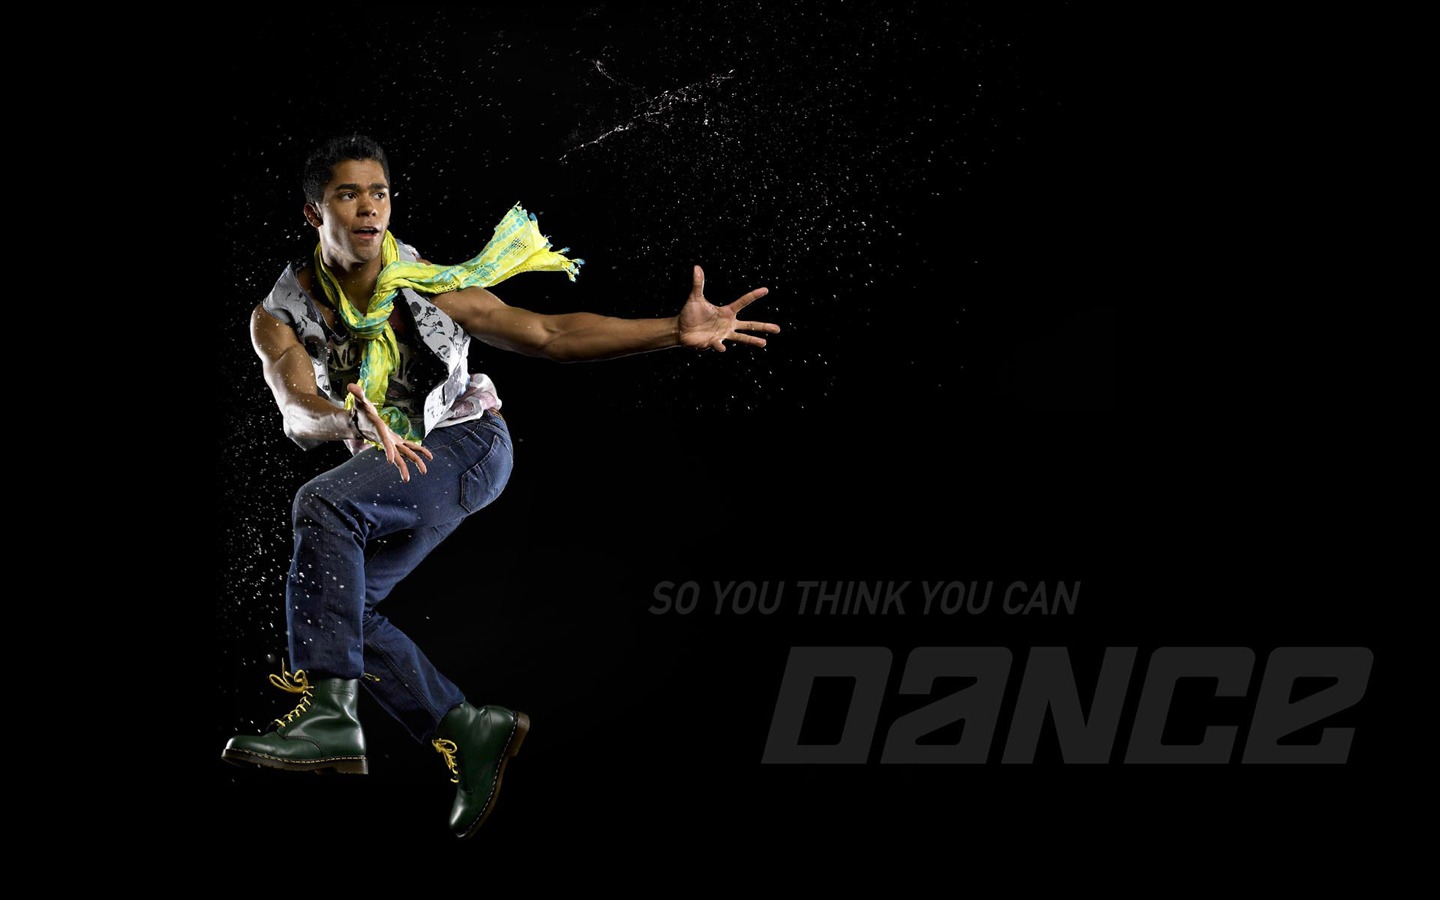 So You Think You Can Dance 舞林爭霸壁紙(一) #2 - 1440x900